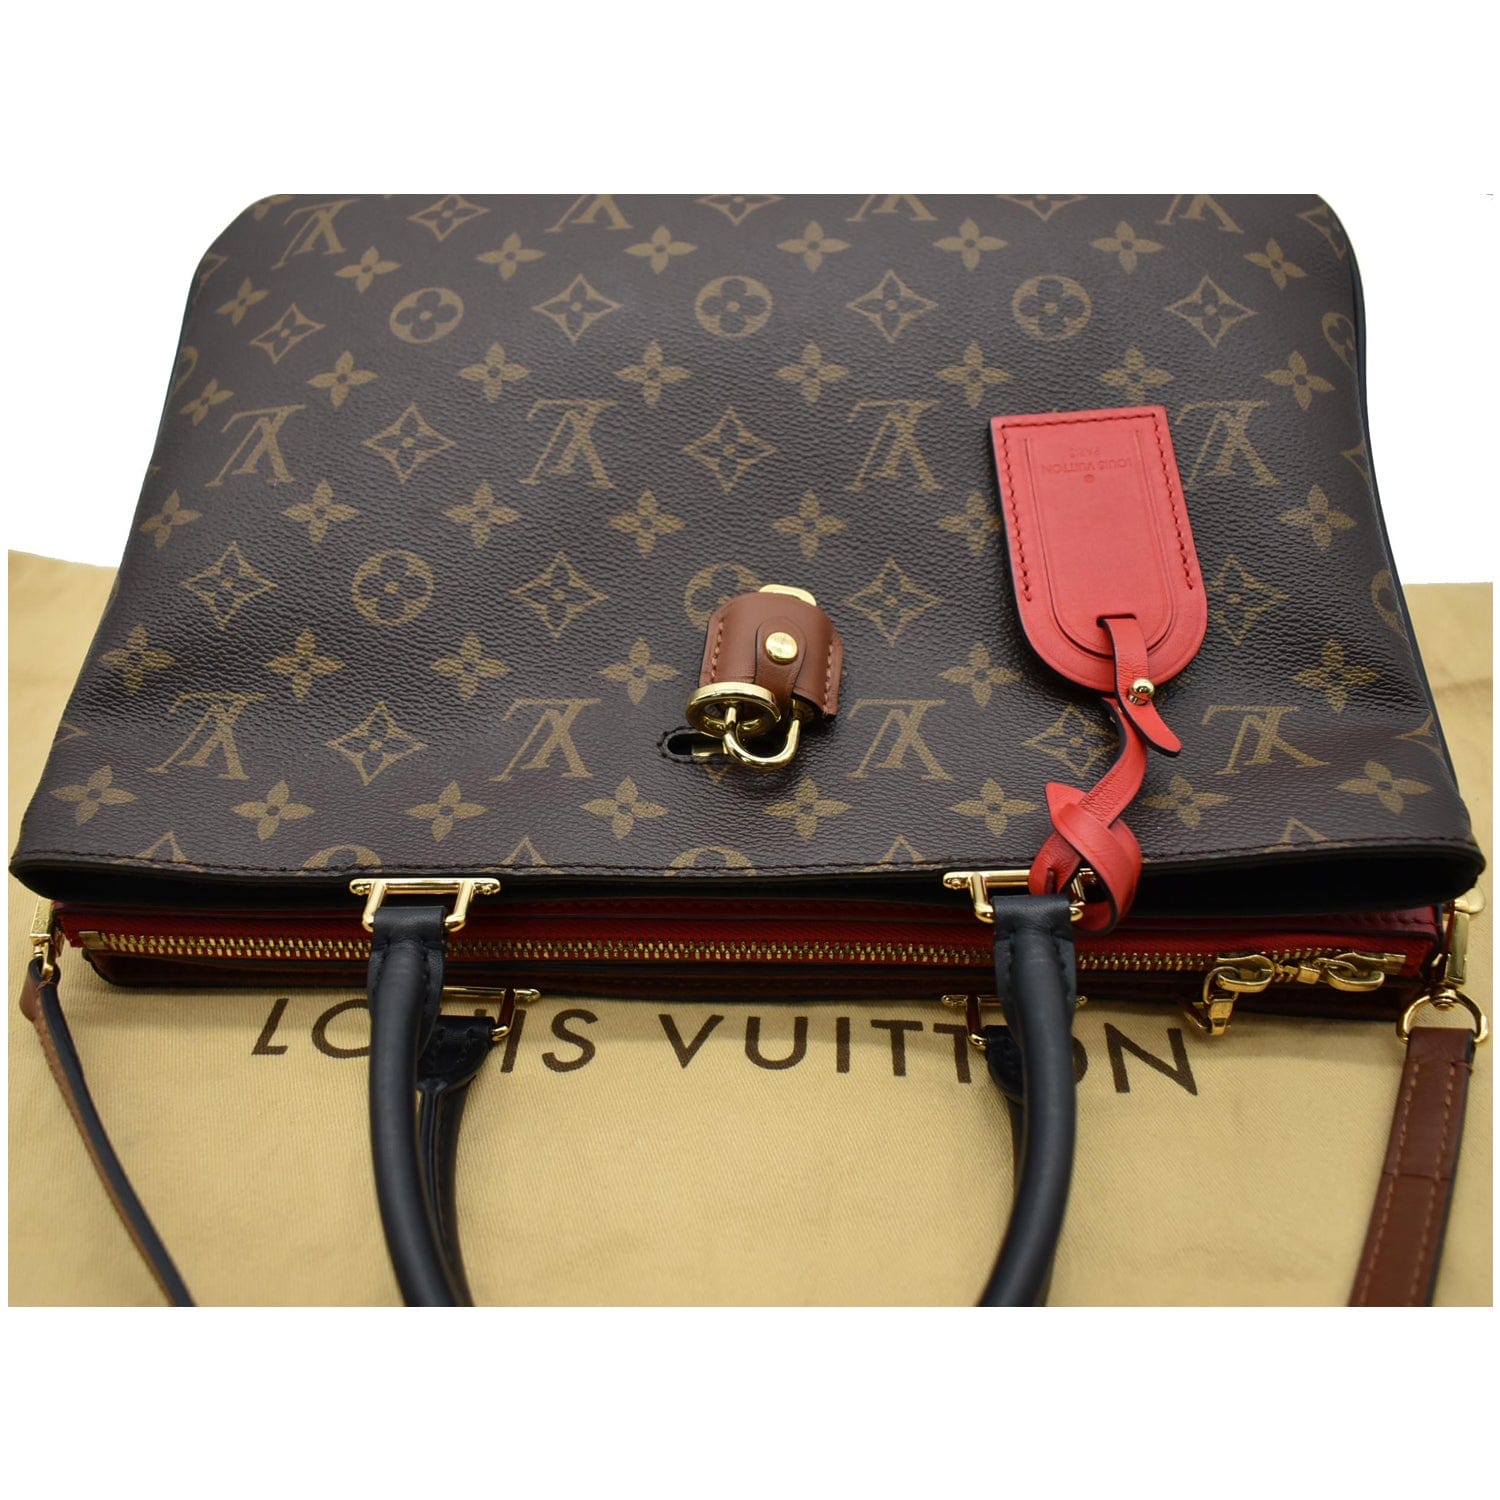 Louis Vuitton Red Monogram Coated Canvas Millefeuille Tote QJB3CK5V0B001